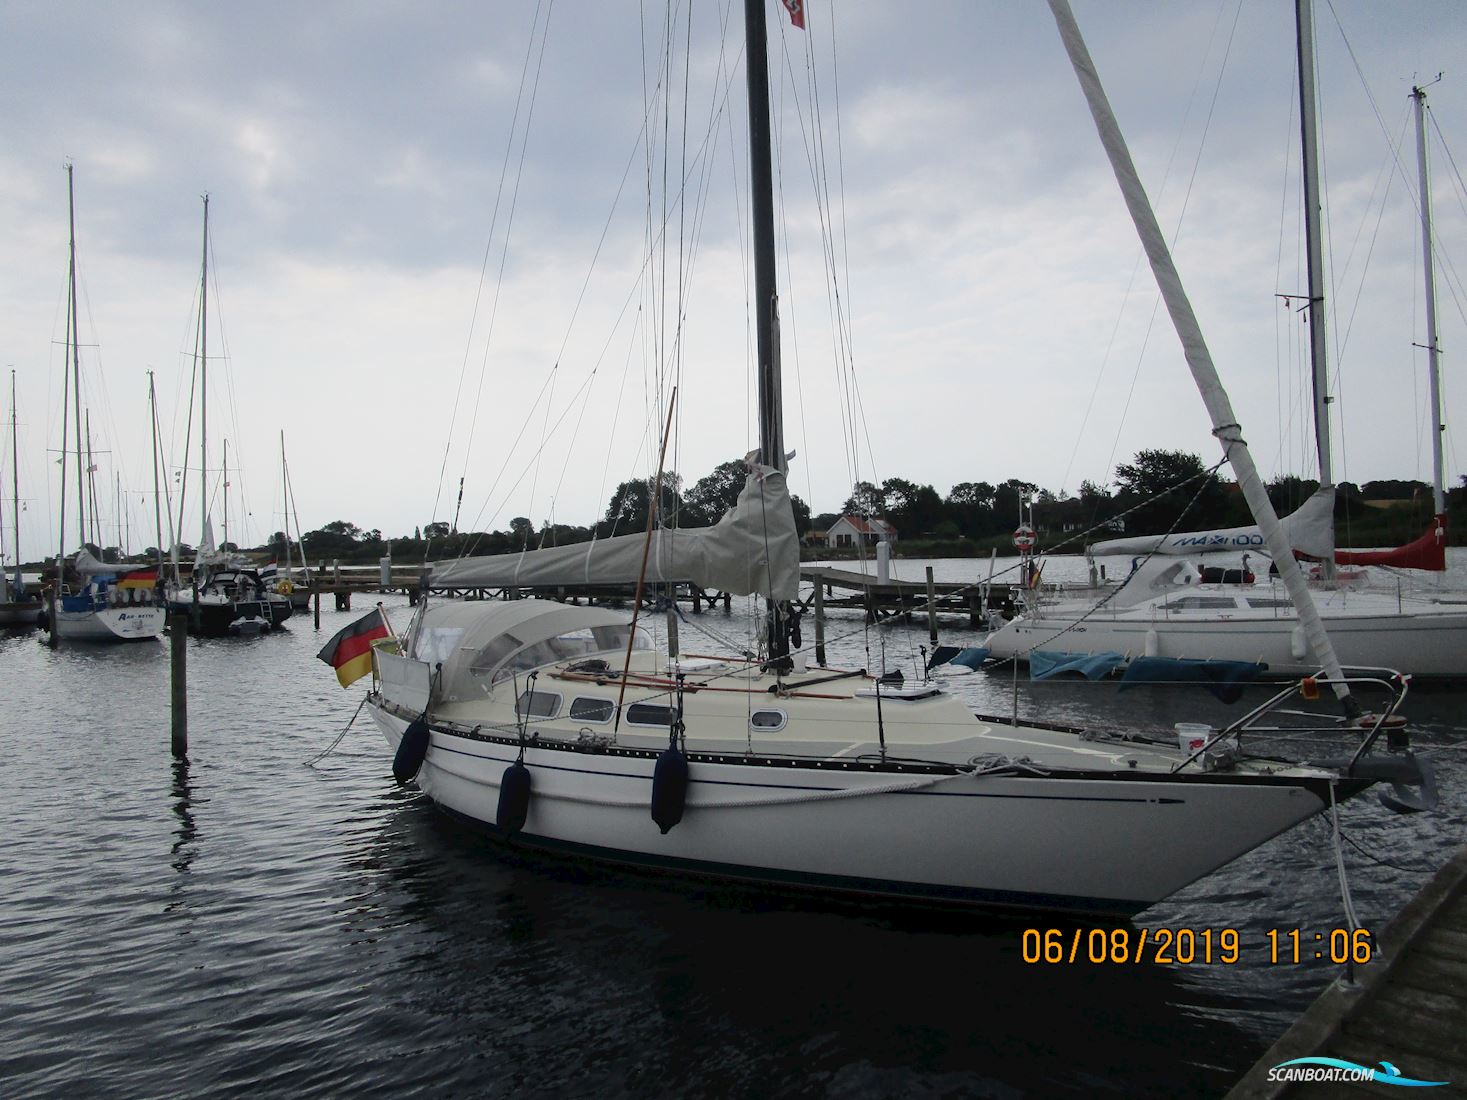 Hanseat 70Bii Sailing boat 1977, with Volvo MD2040 engine, Germany